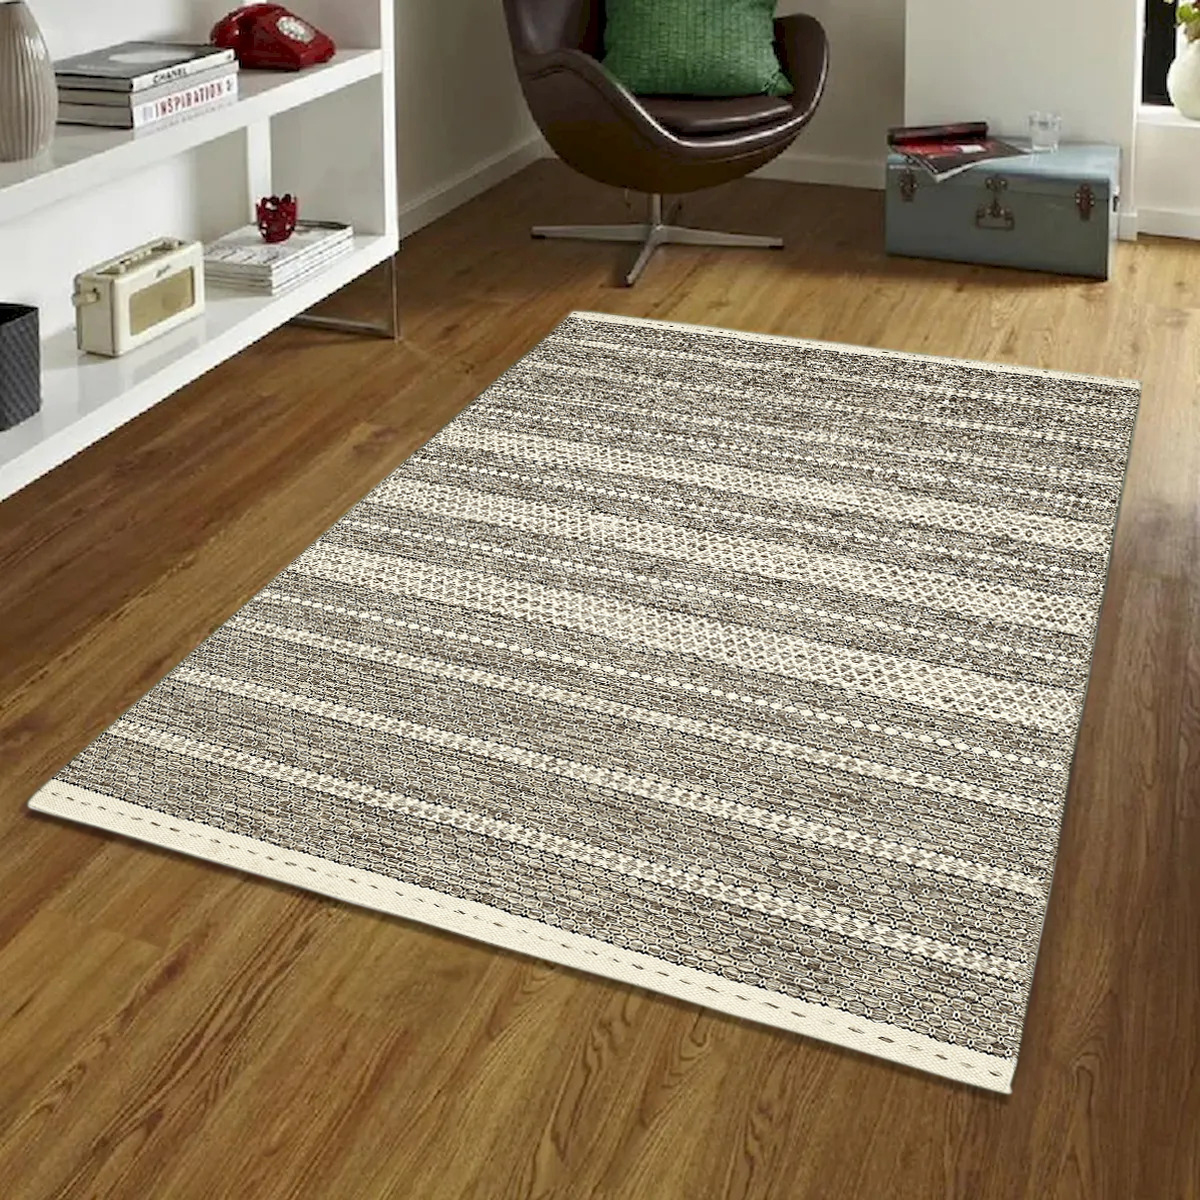 Designs-Done-Right 2 x 3 ft. Nordique Light Gray & Cream Handmade Reversible Wool Rectangle Area Rug